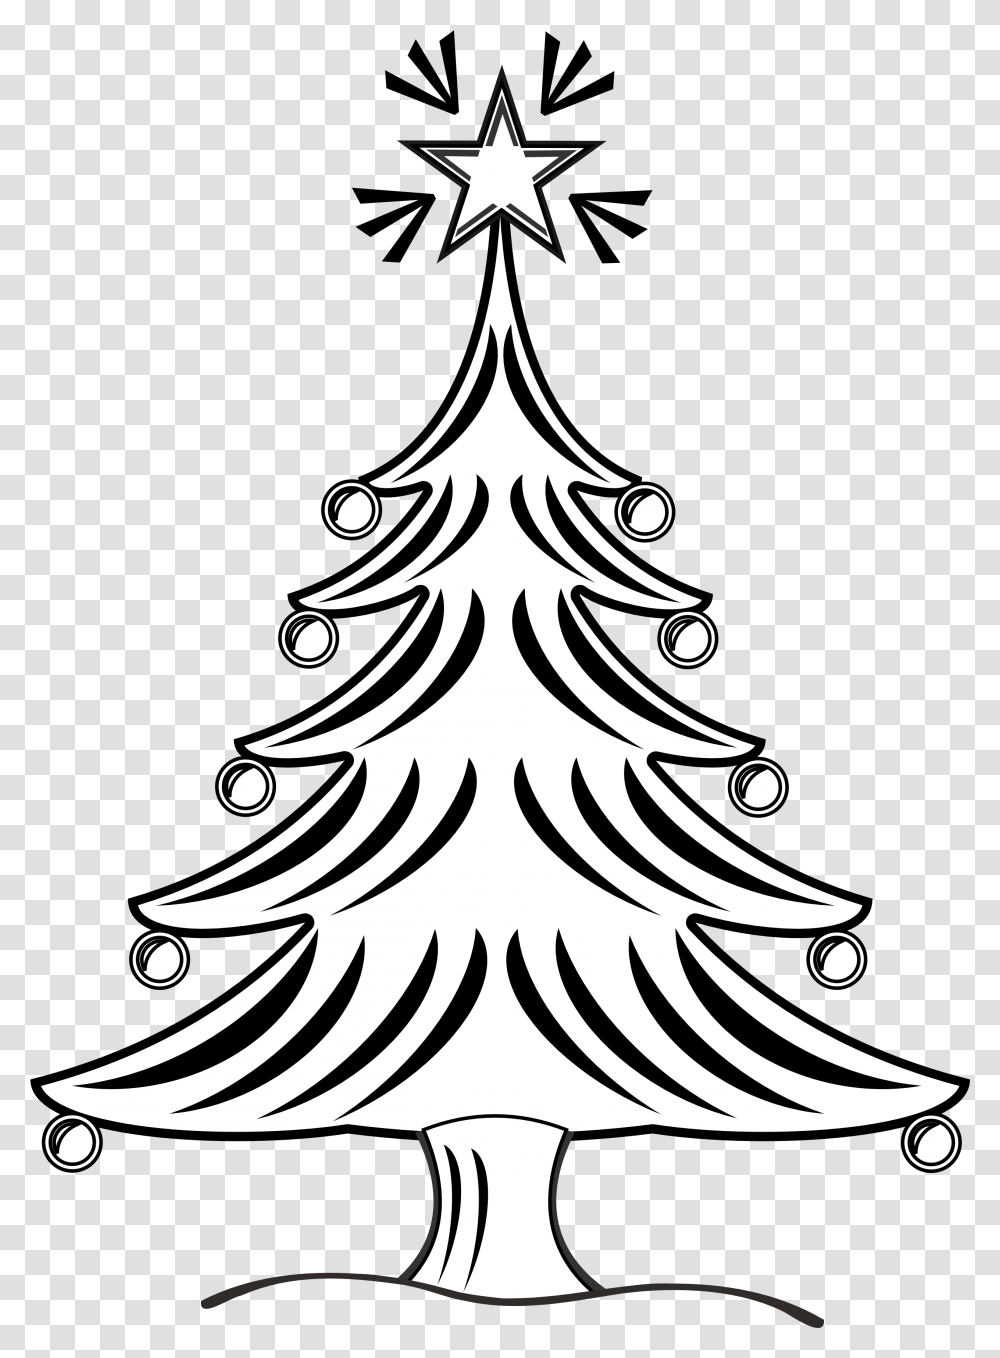 Free Christmas Tree Drawing Download Clip Art Christmas Tree Images Black And White, Stencil, Wedding Cake, Dessert, Food Transparent Png